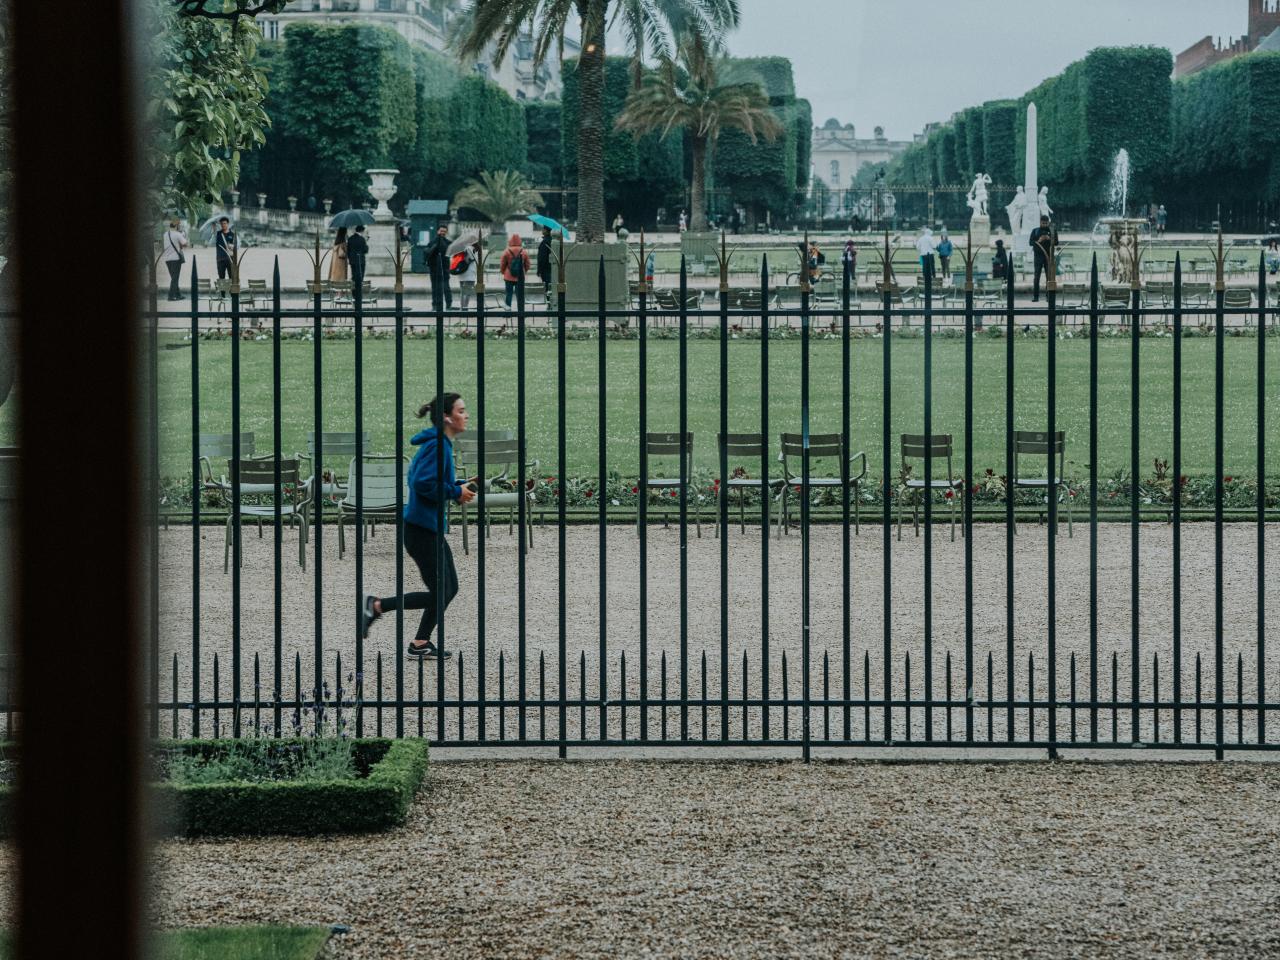 A woman running behind a fence